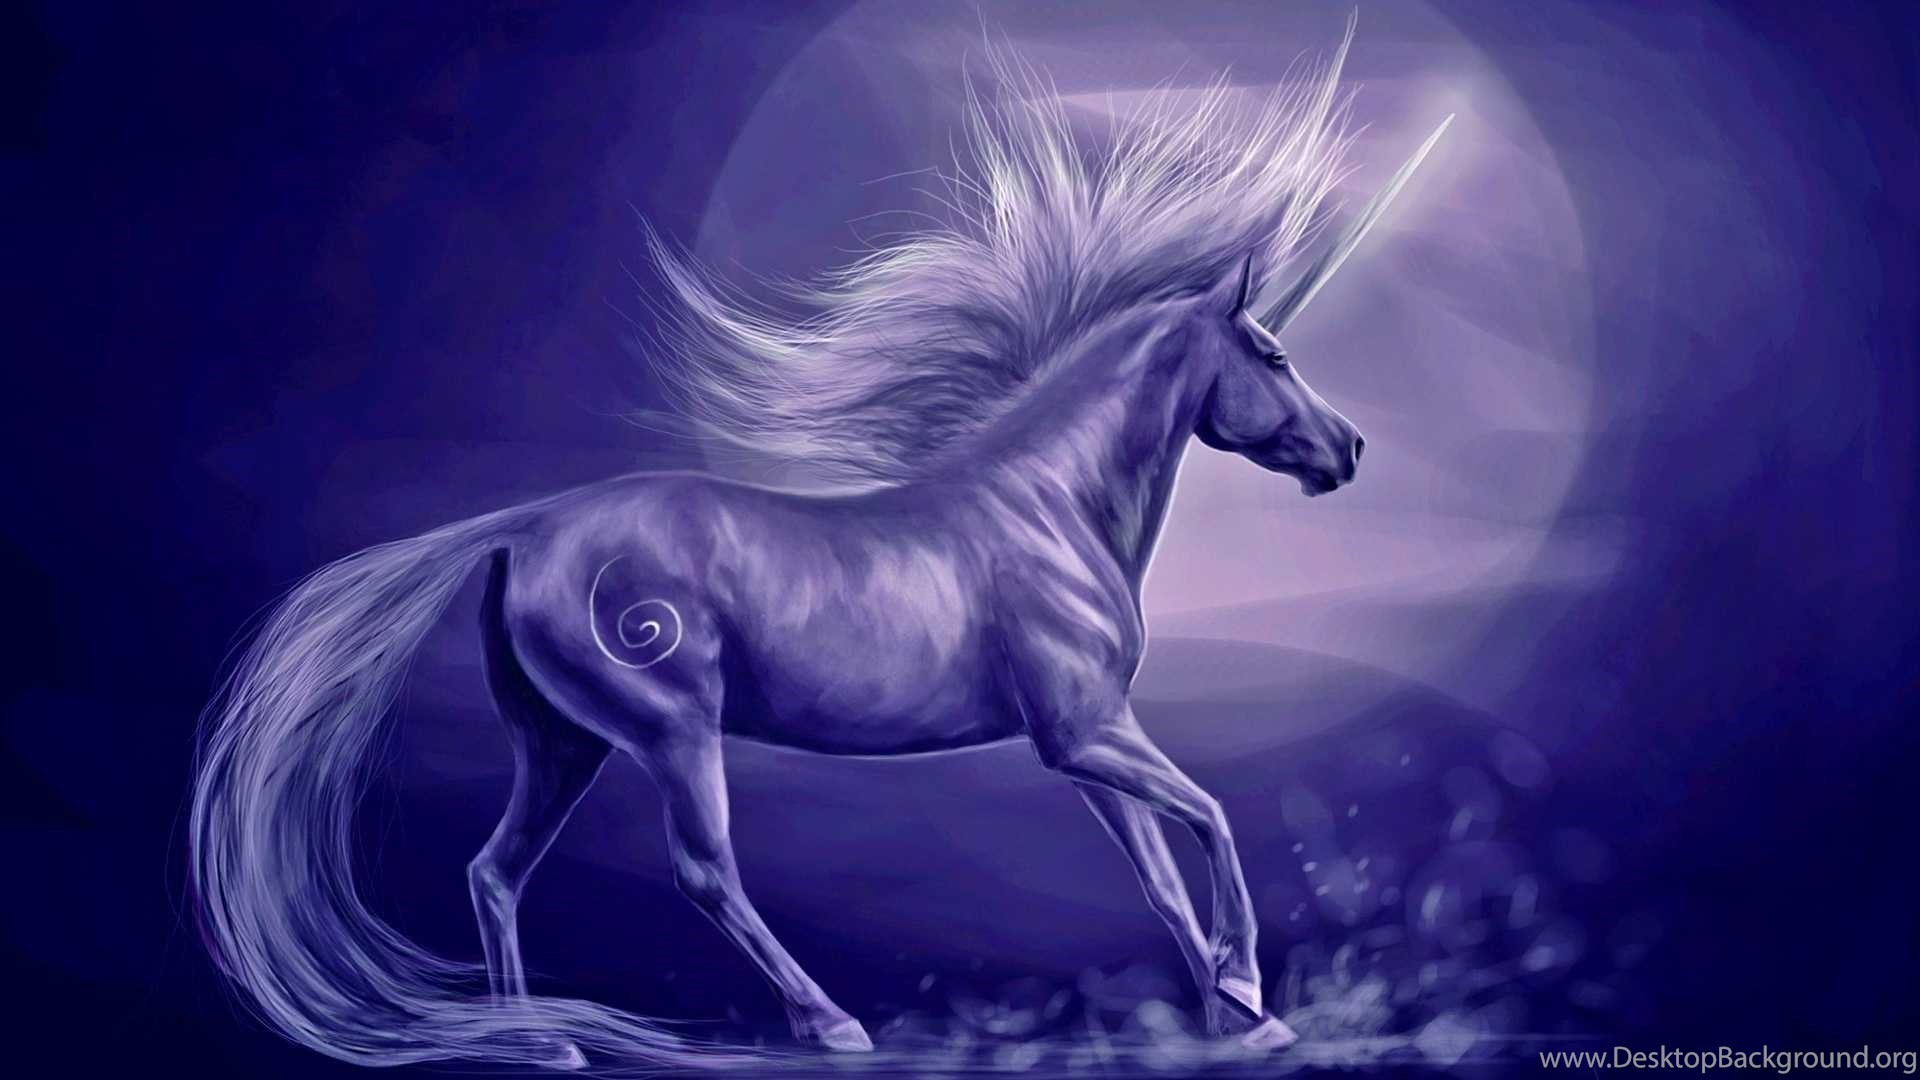 Unicorn wallpapers HD  Download Free backgrounds